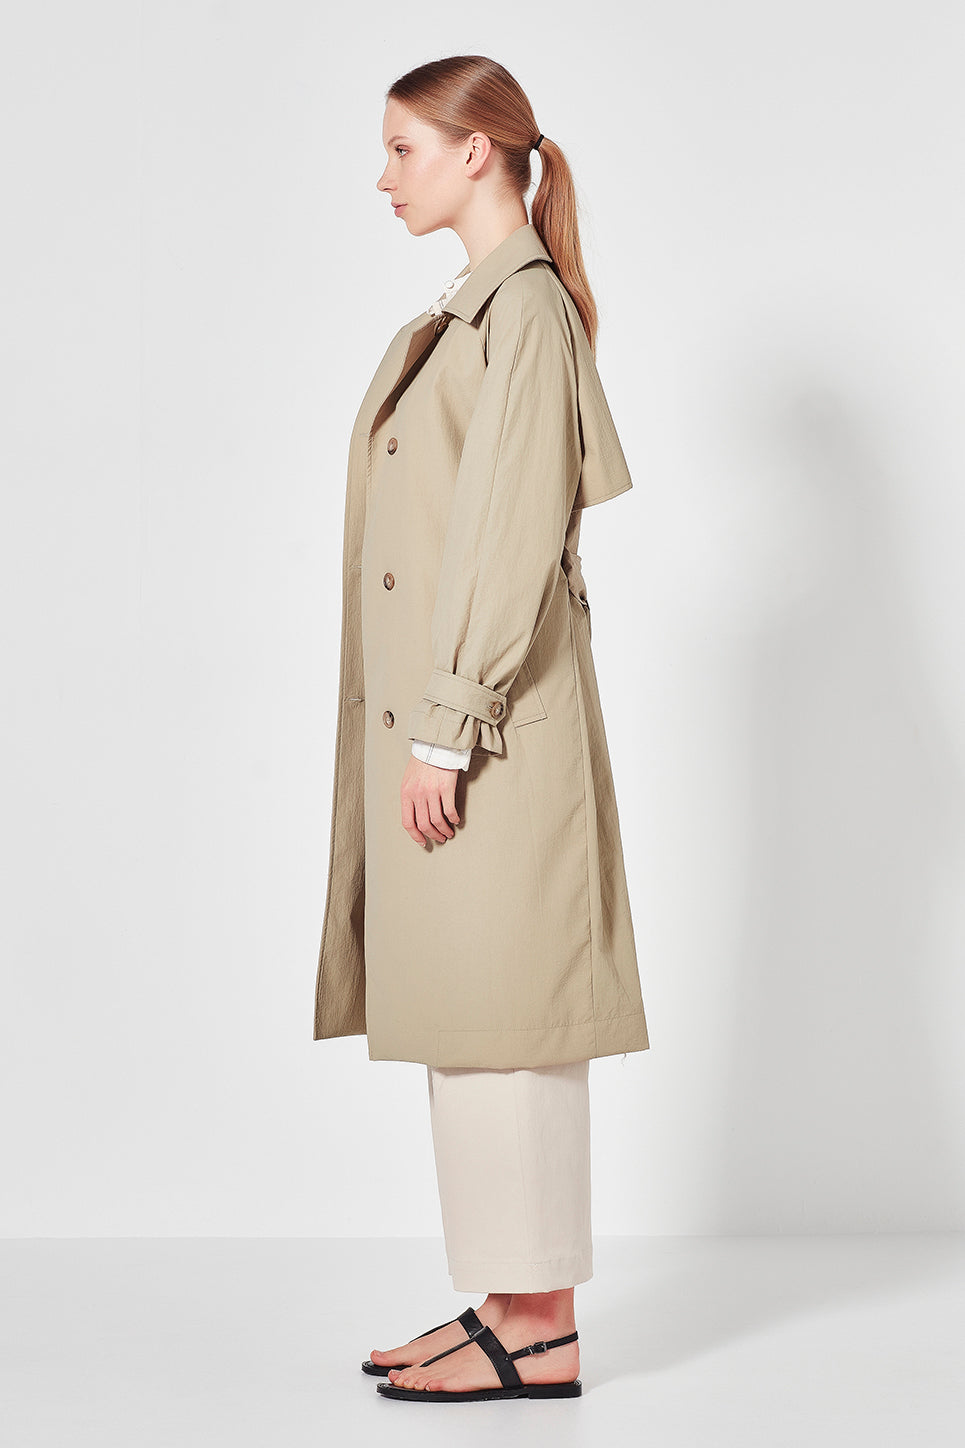 The Kingsly Coat in Taupe